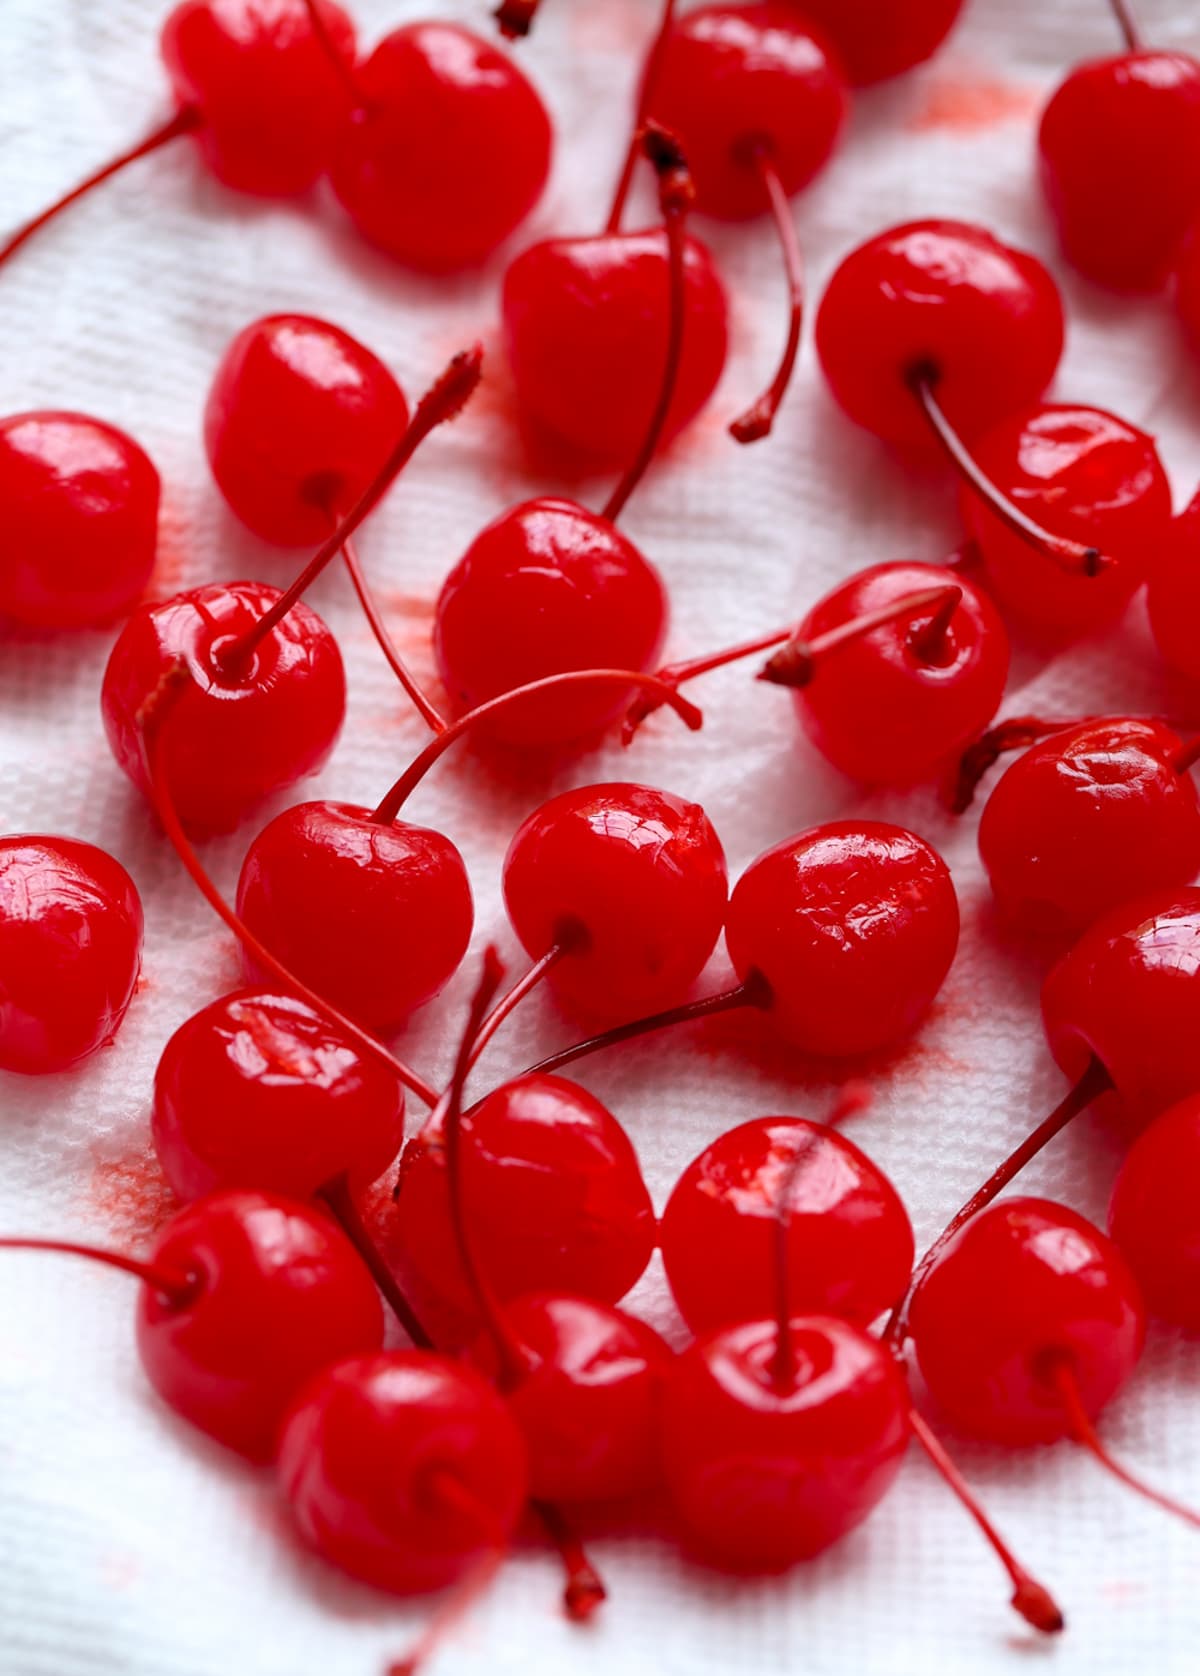 Scattered Maraschino cherries on a piece of parchment paper.